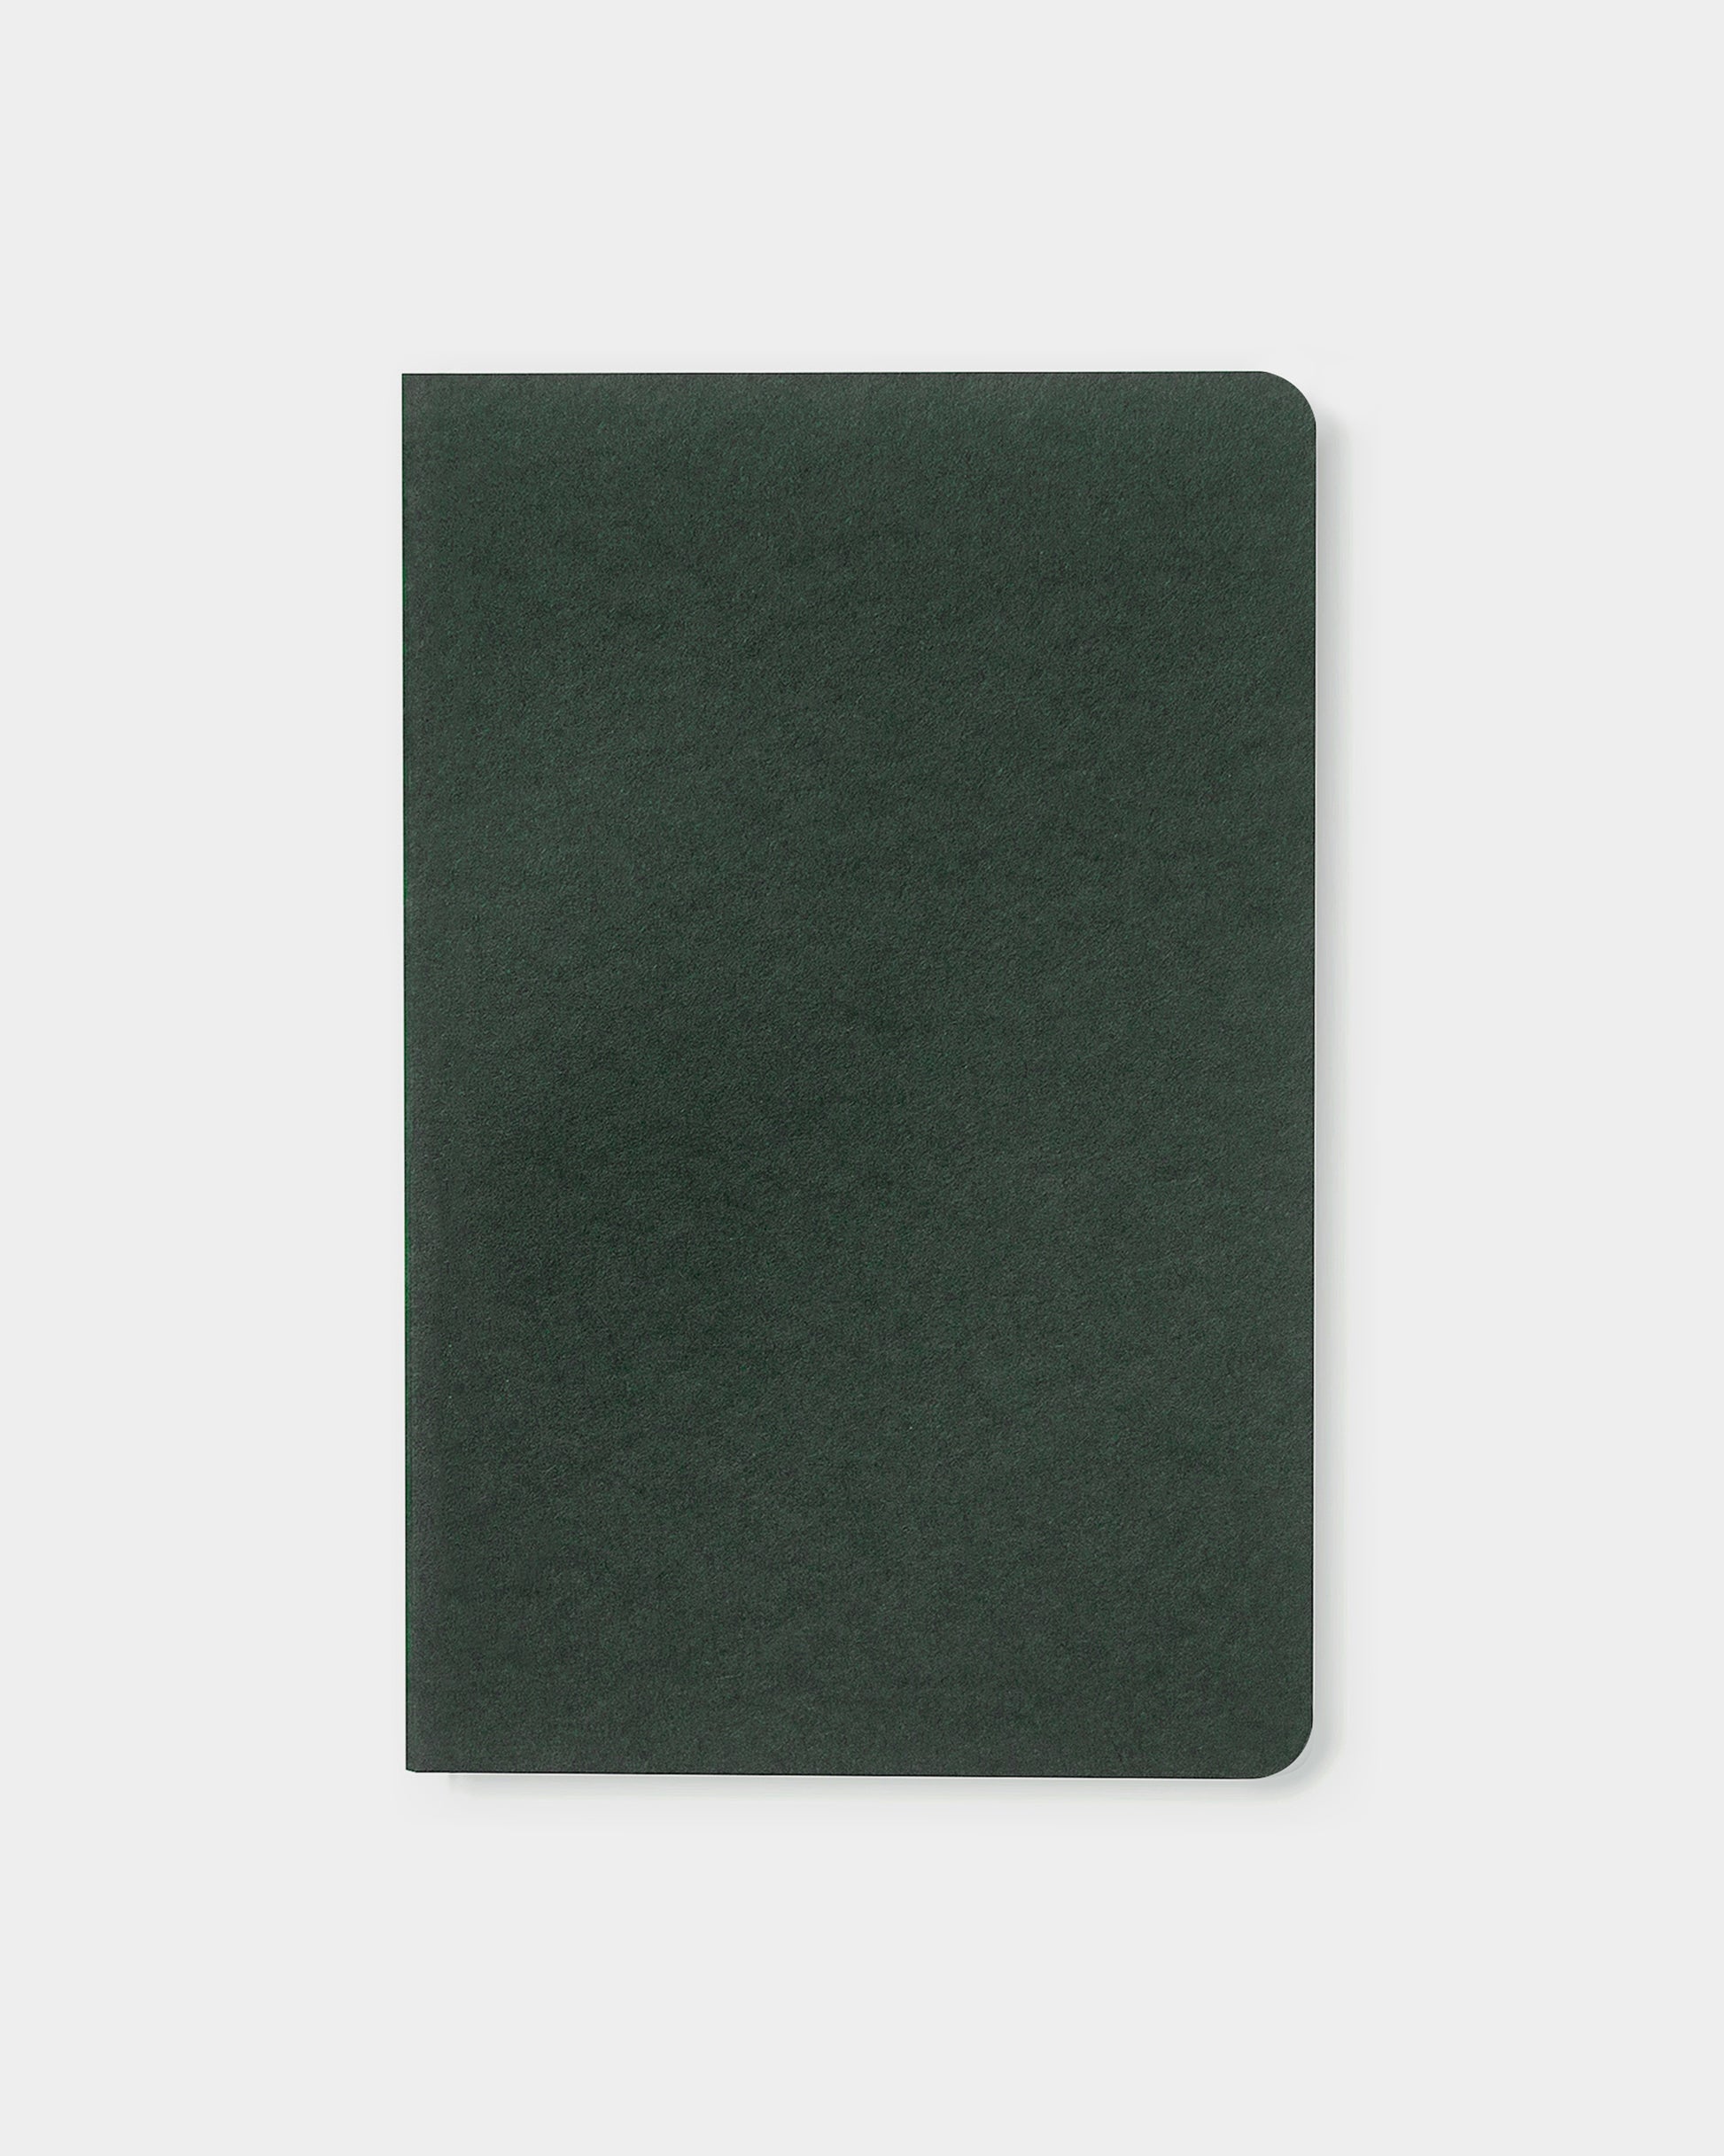 4.25 x 6.5" standard notebook, made with eco-friendly papers. Graph pages, evergreen color way.